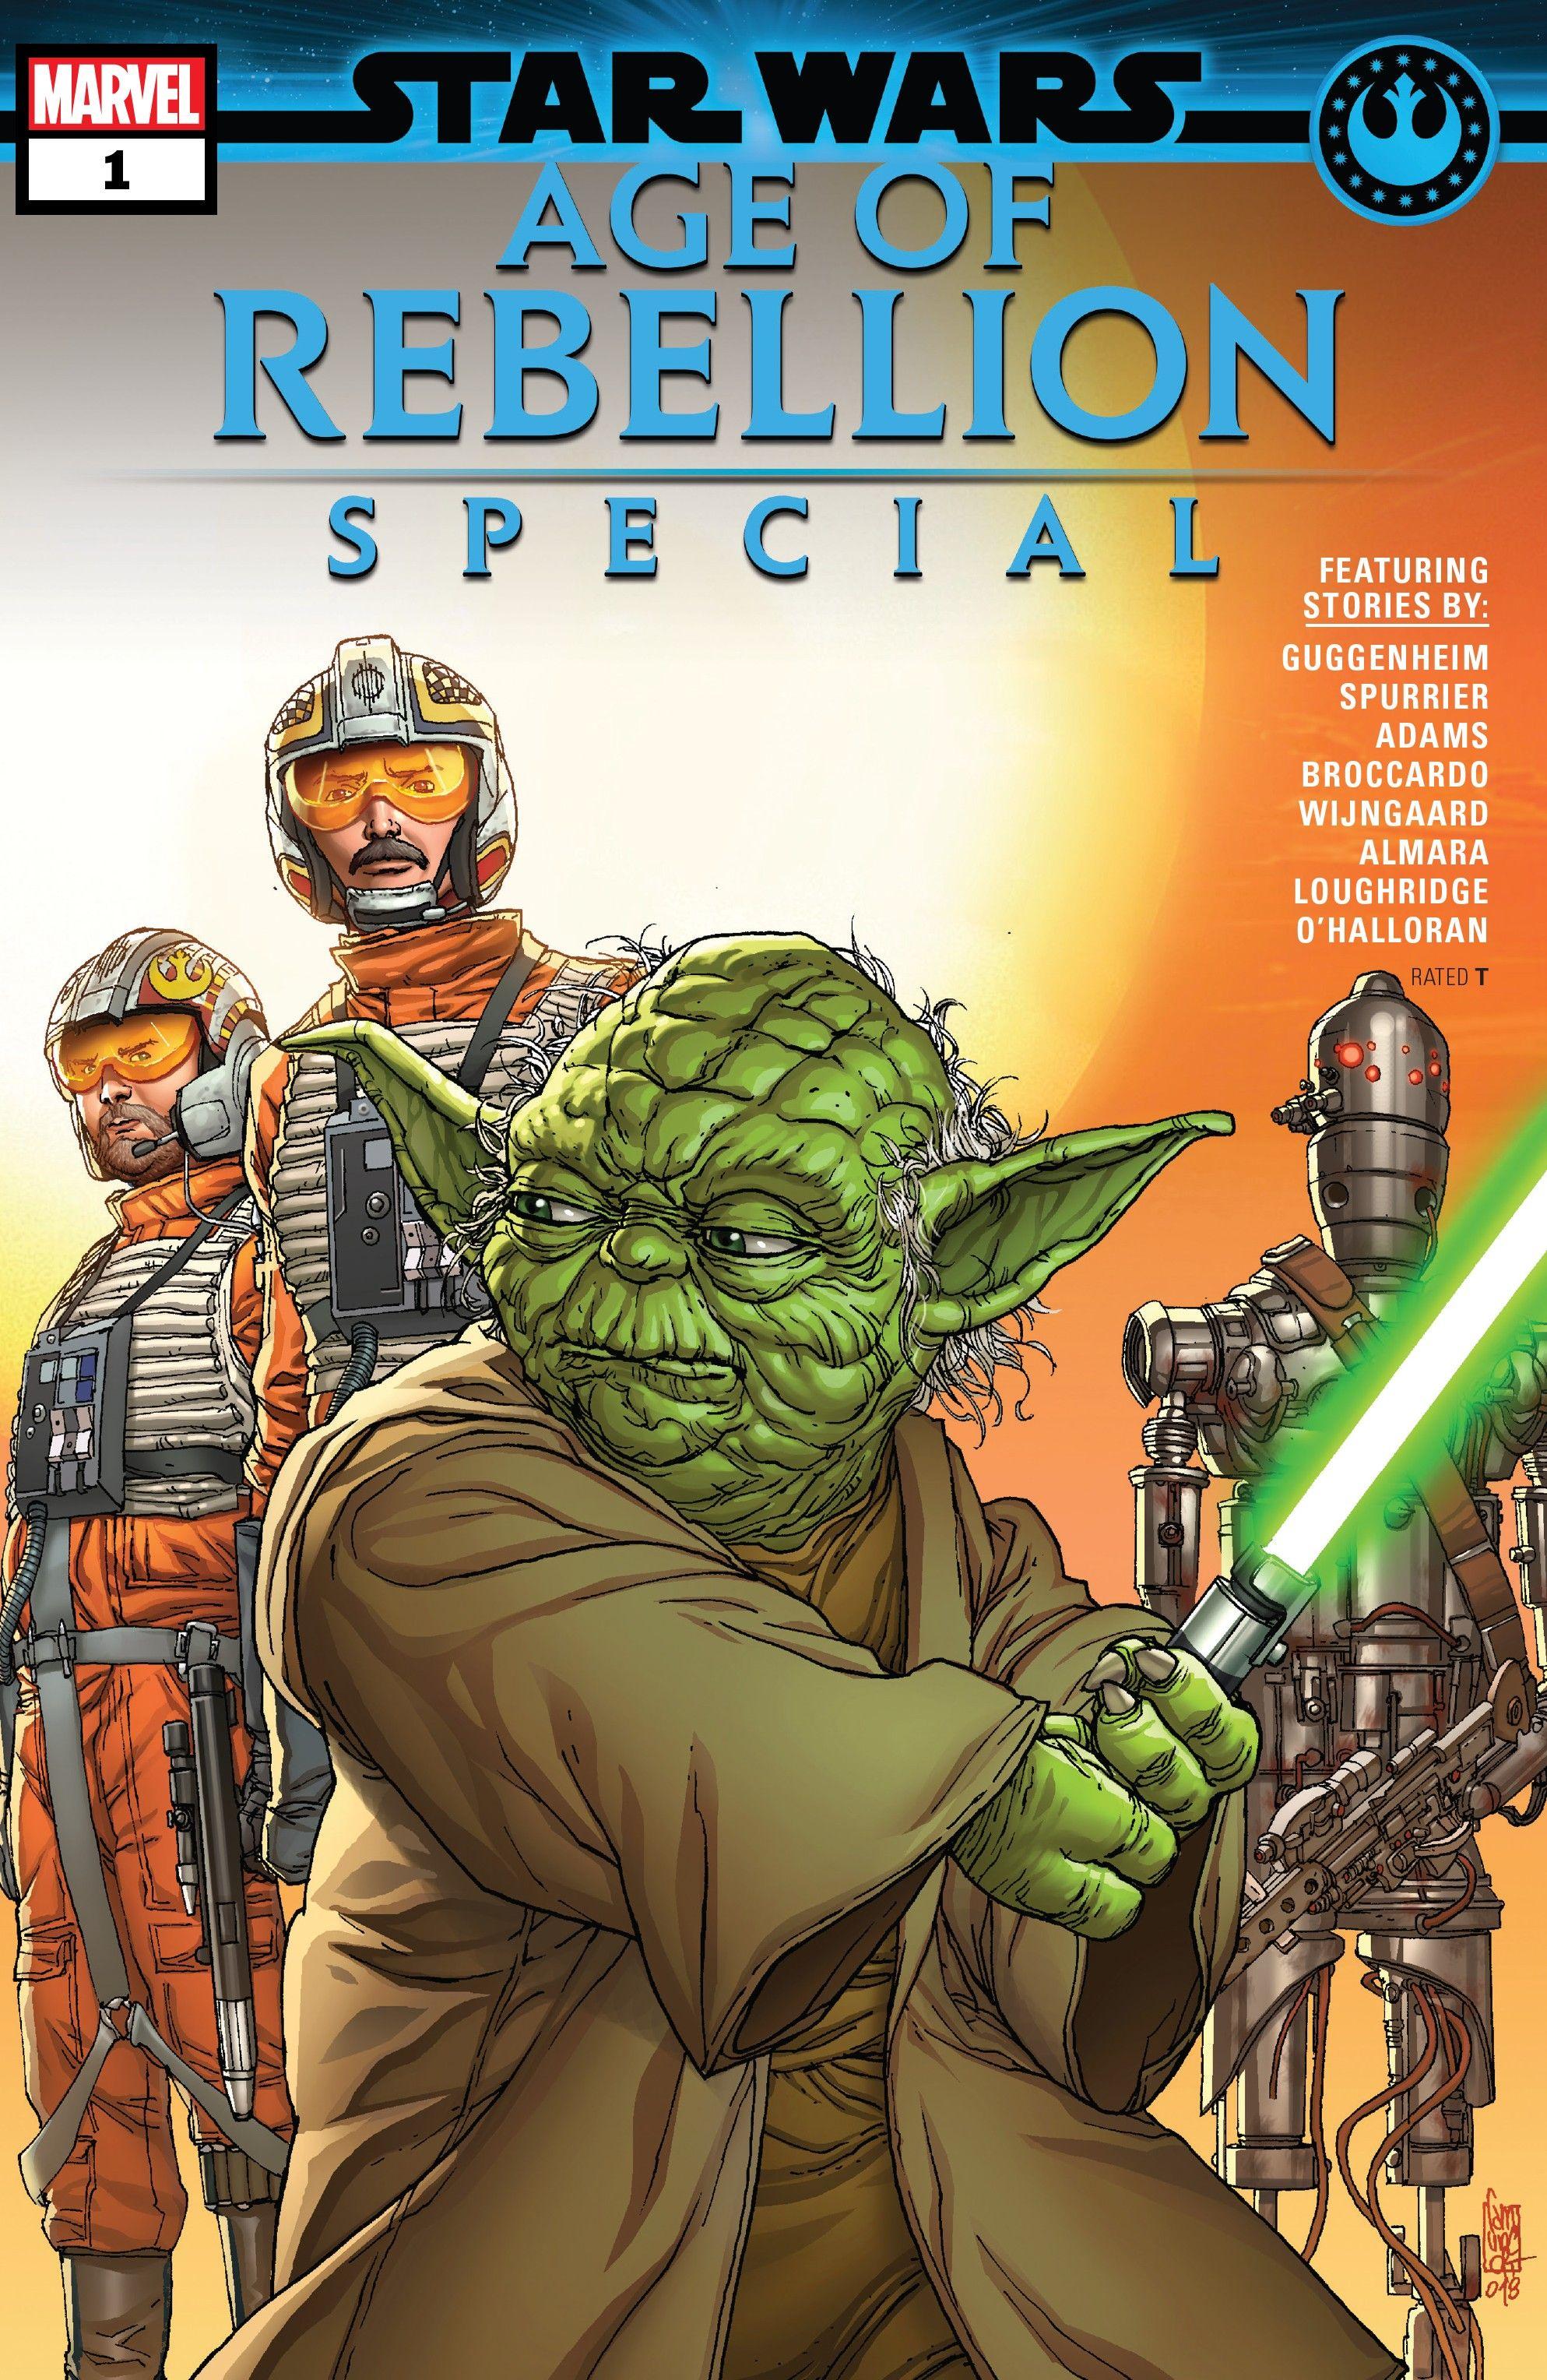 Star Wars: Age of Rebellion Special Vol. 1 #1